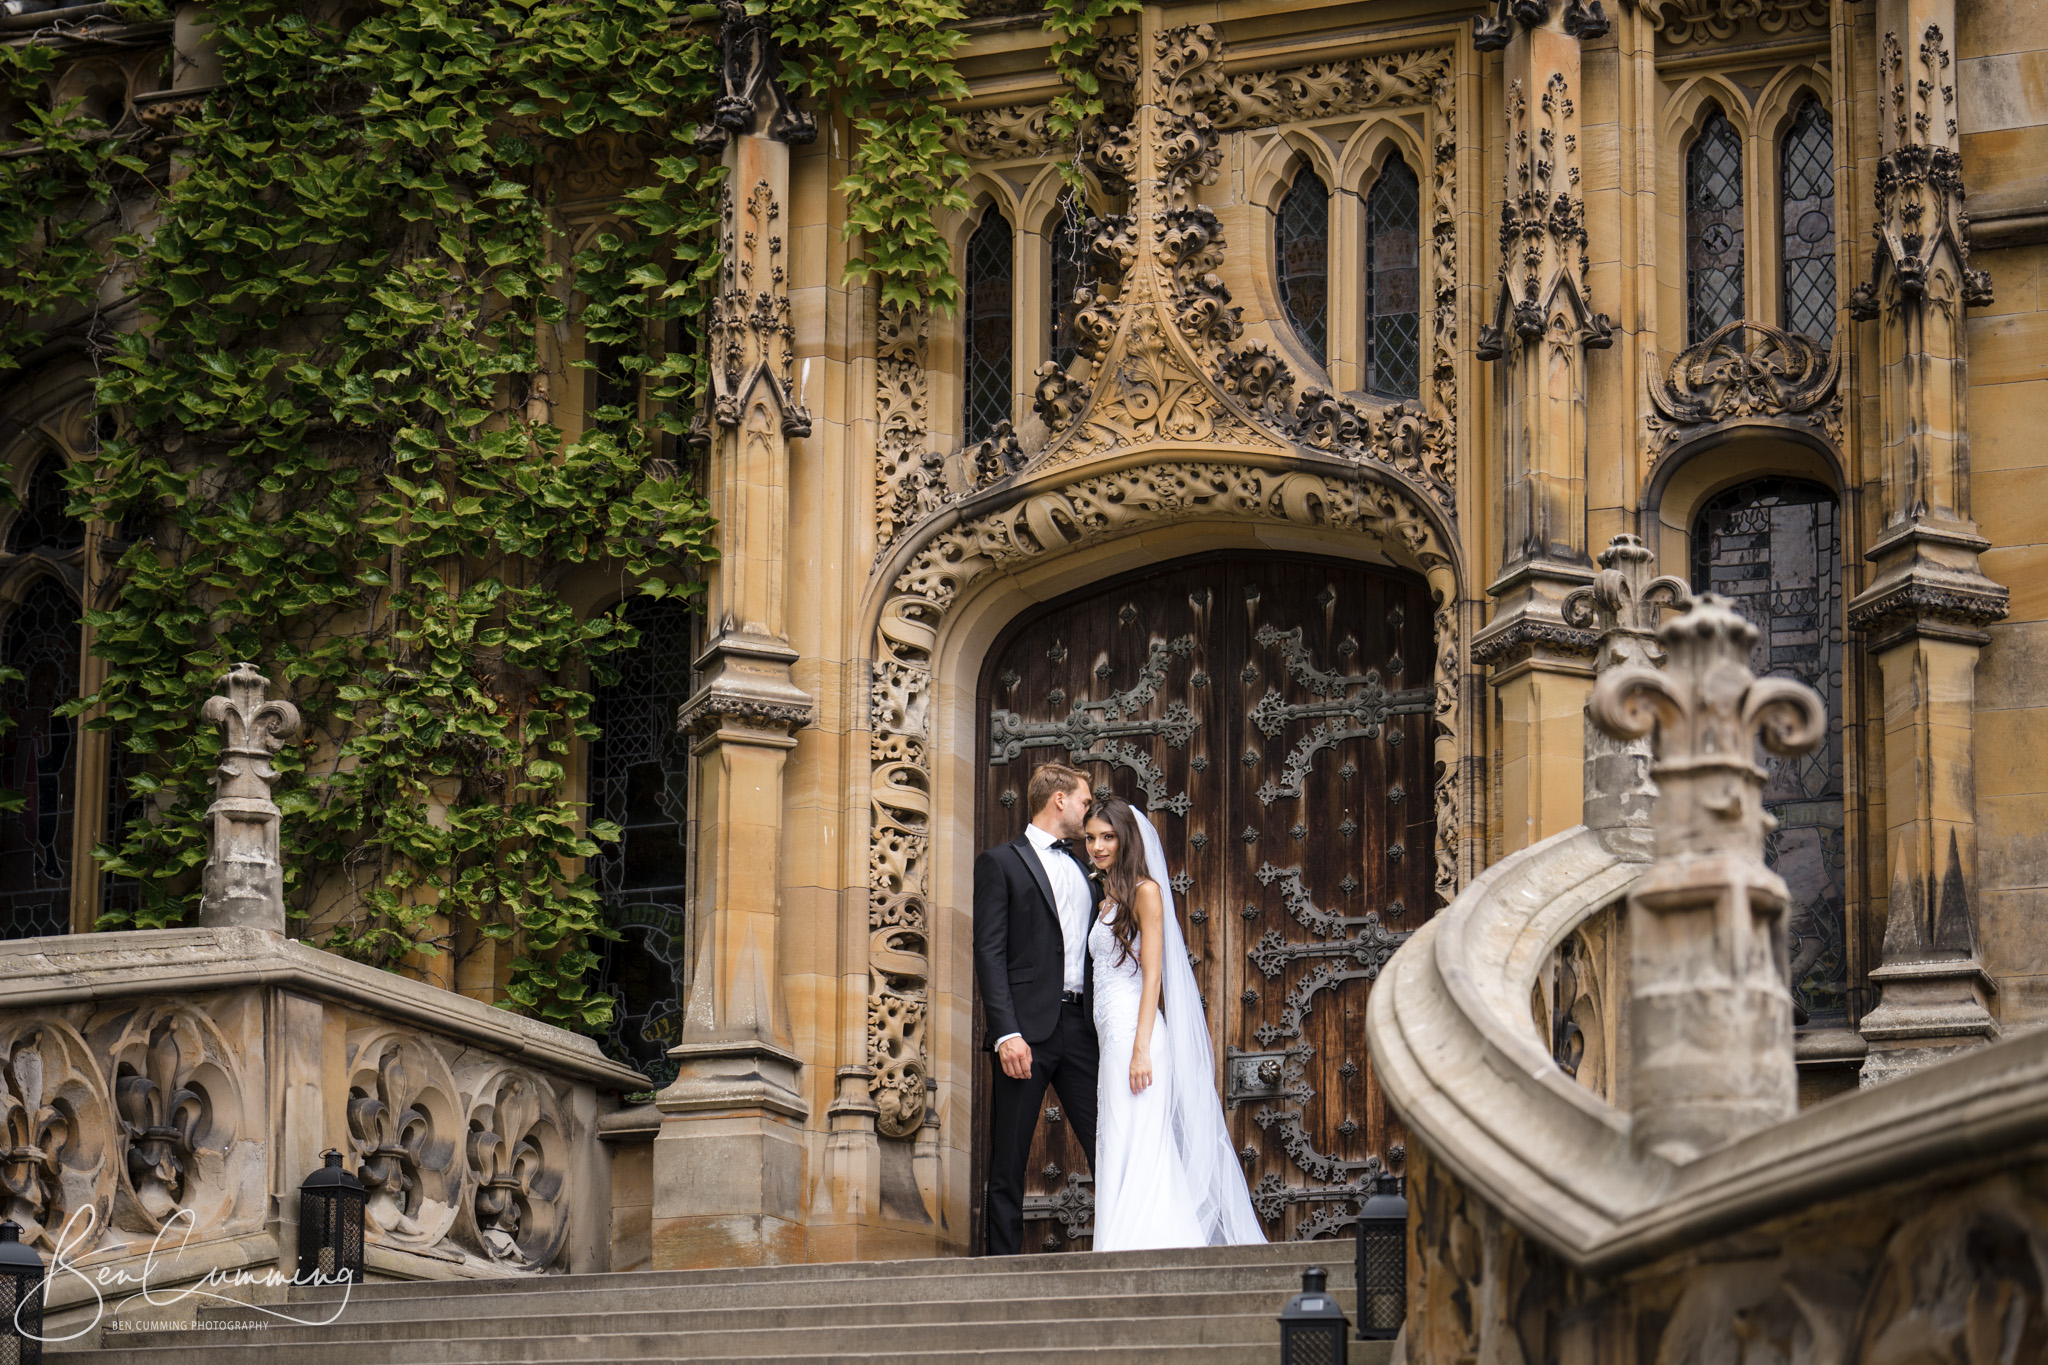 A Carlton Towers wedding photographer captures a bride and groom on the steps of an ornate building.